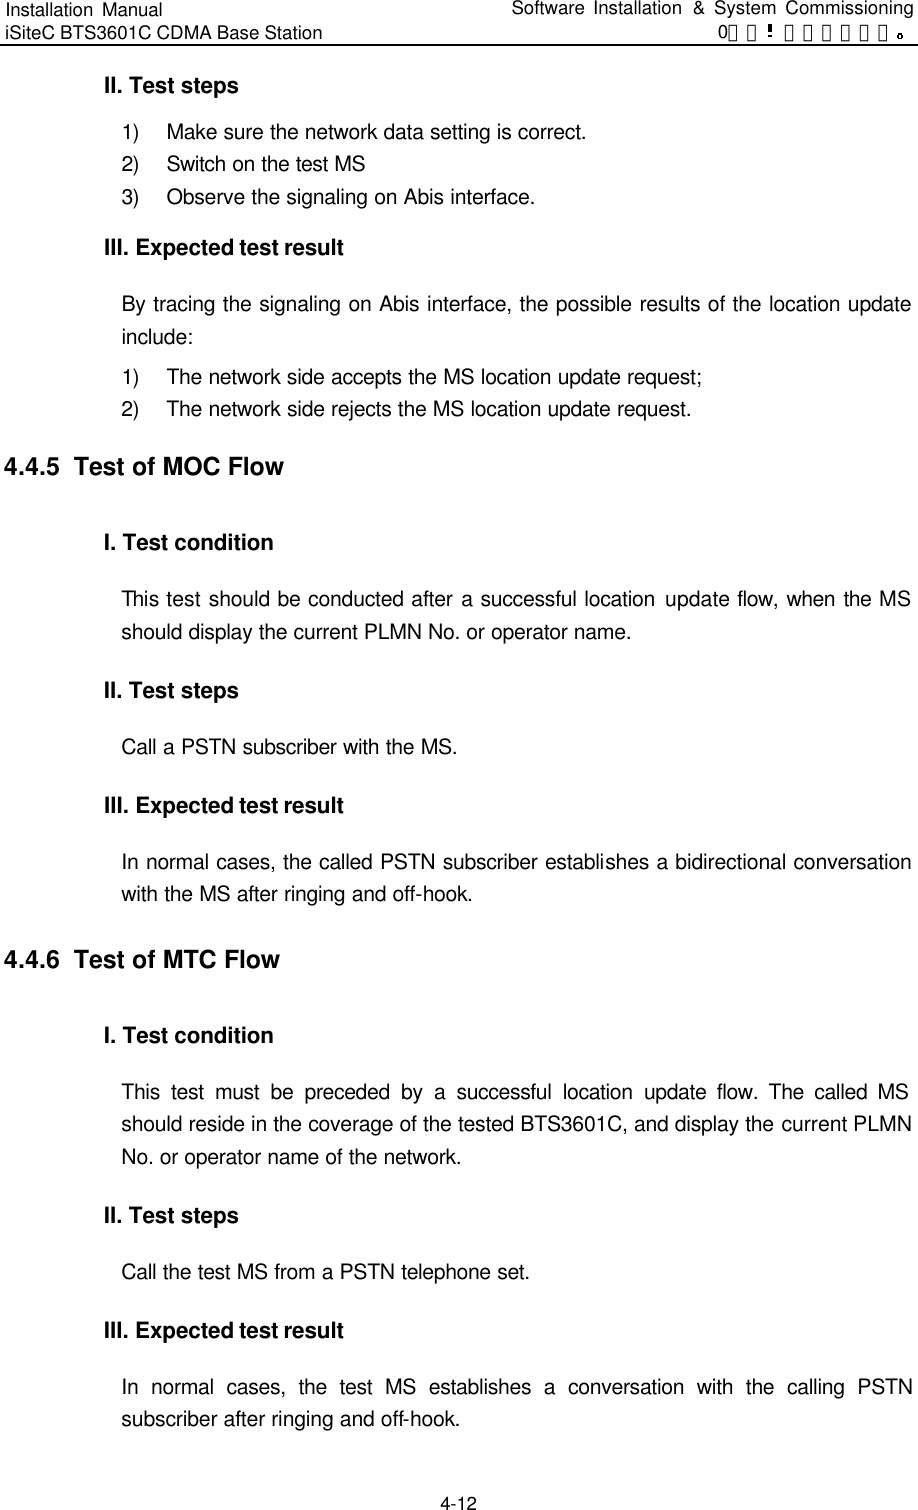 Installation Manual   iSiteC BTS3601C CDMA Base Station Software Installation &amp; System Commissioning 0错误 表格结果无效  4-12 II. Test steps 1) Make sure the network data setting is correct. 2) Switch on the test MS 3) Observe the signaling on Abis interface.   III. Expected test result By tracing the signaling on Abis interface, the possible results of the location update include:   1) The network side accepts the MS location update request;   2) The network side rejects the MS location update request.   4.4.5  Test of MOC Flow I. Test condition This test should be conducted after a successful location update flow, when the MS should display the current PLMN No. or operator name.   II. Test steps Call a PSTN subscriber with the MS.   III. Expected test result In normal cases, the called PSTN subscriber establishes a bidirectional conversation with the MS after ringing and off-hook.   4.4.6  Test of MTC Flow I. Test condition This test must be preceded by a successful location update flow. The called MS should reside in the coverage of the tested BTS3601C, and display the current PLMN No. or operator name of the network.   II. Test steps Call the test MS from a PSTN telephone set.   III. Expected test result In normal cases, the test MS establishes a conversation with the calling PSTN subscriber after ringing and off-hook.   